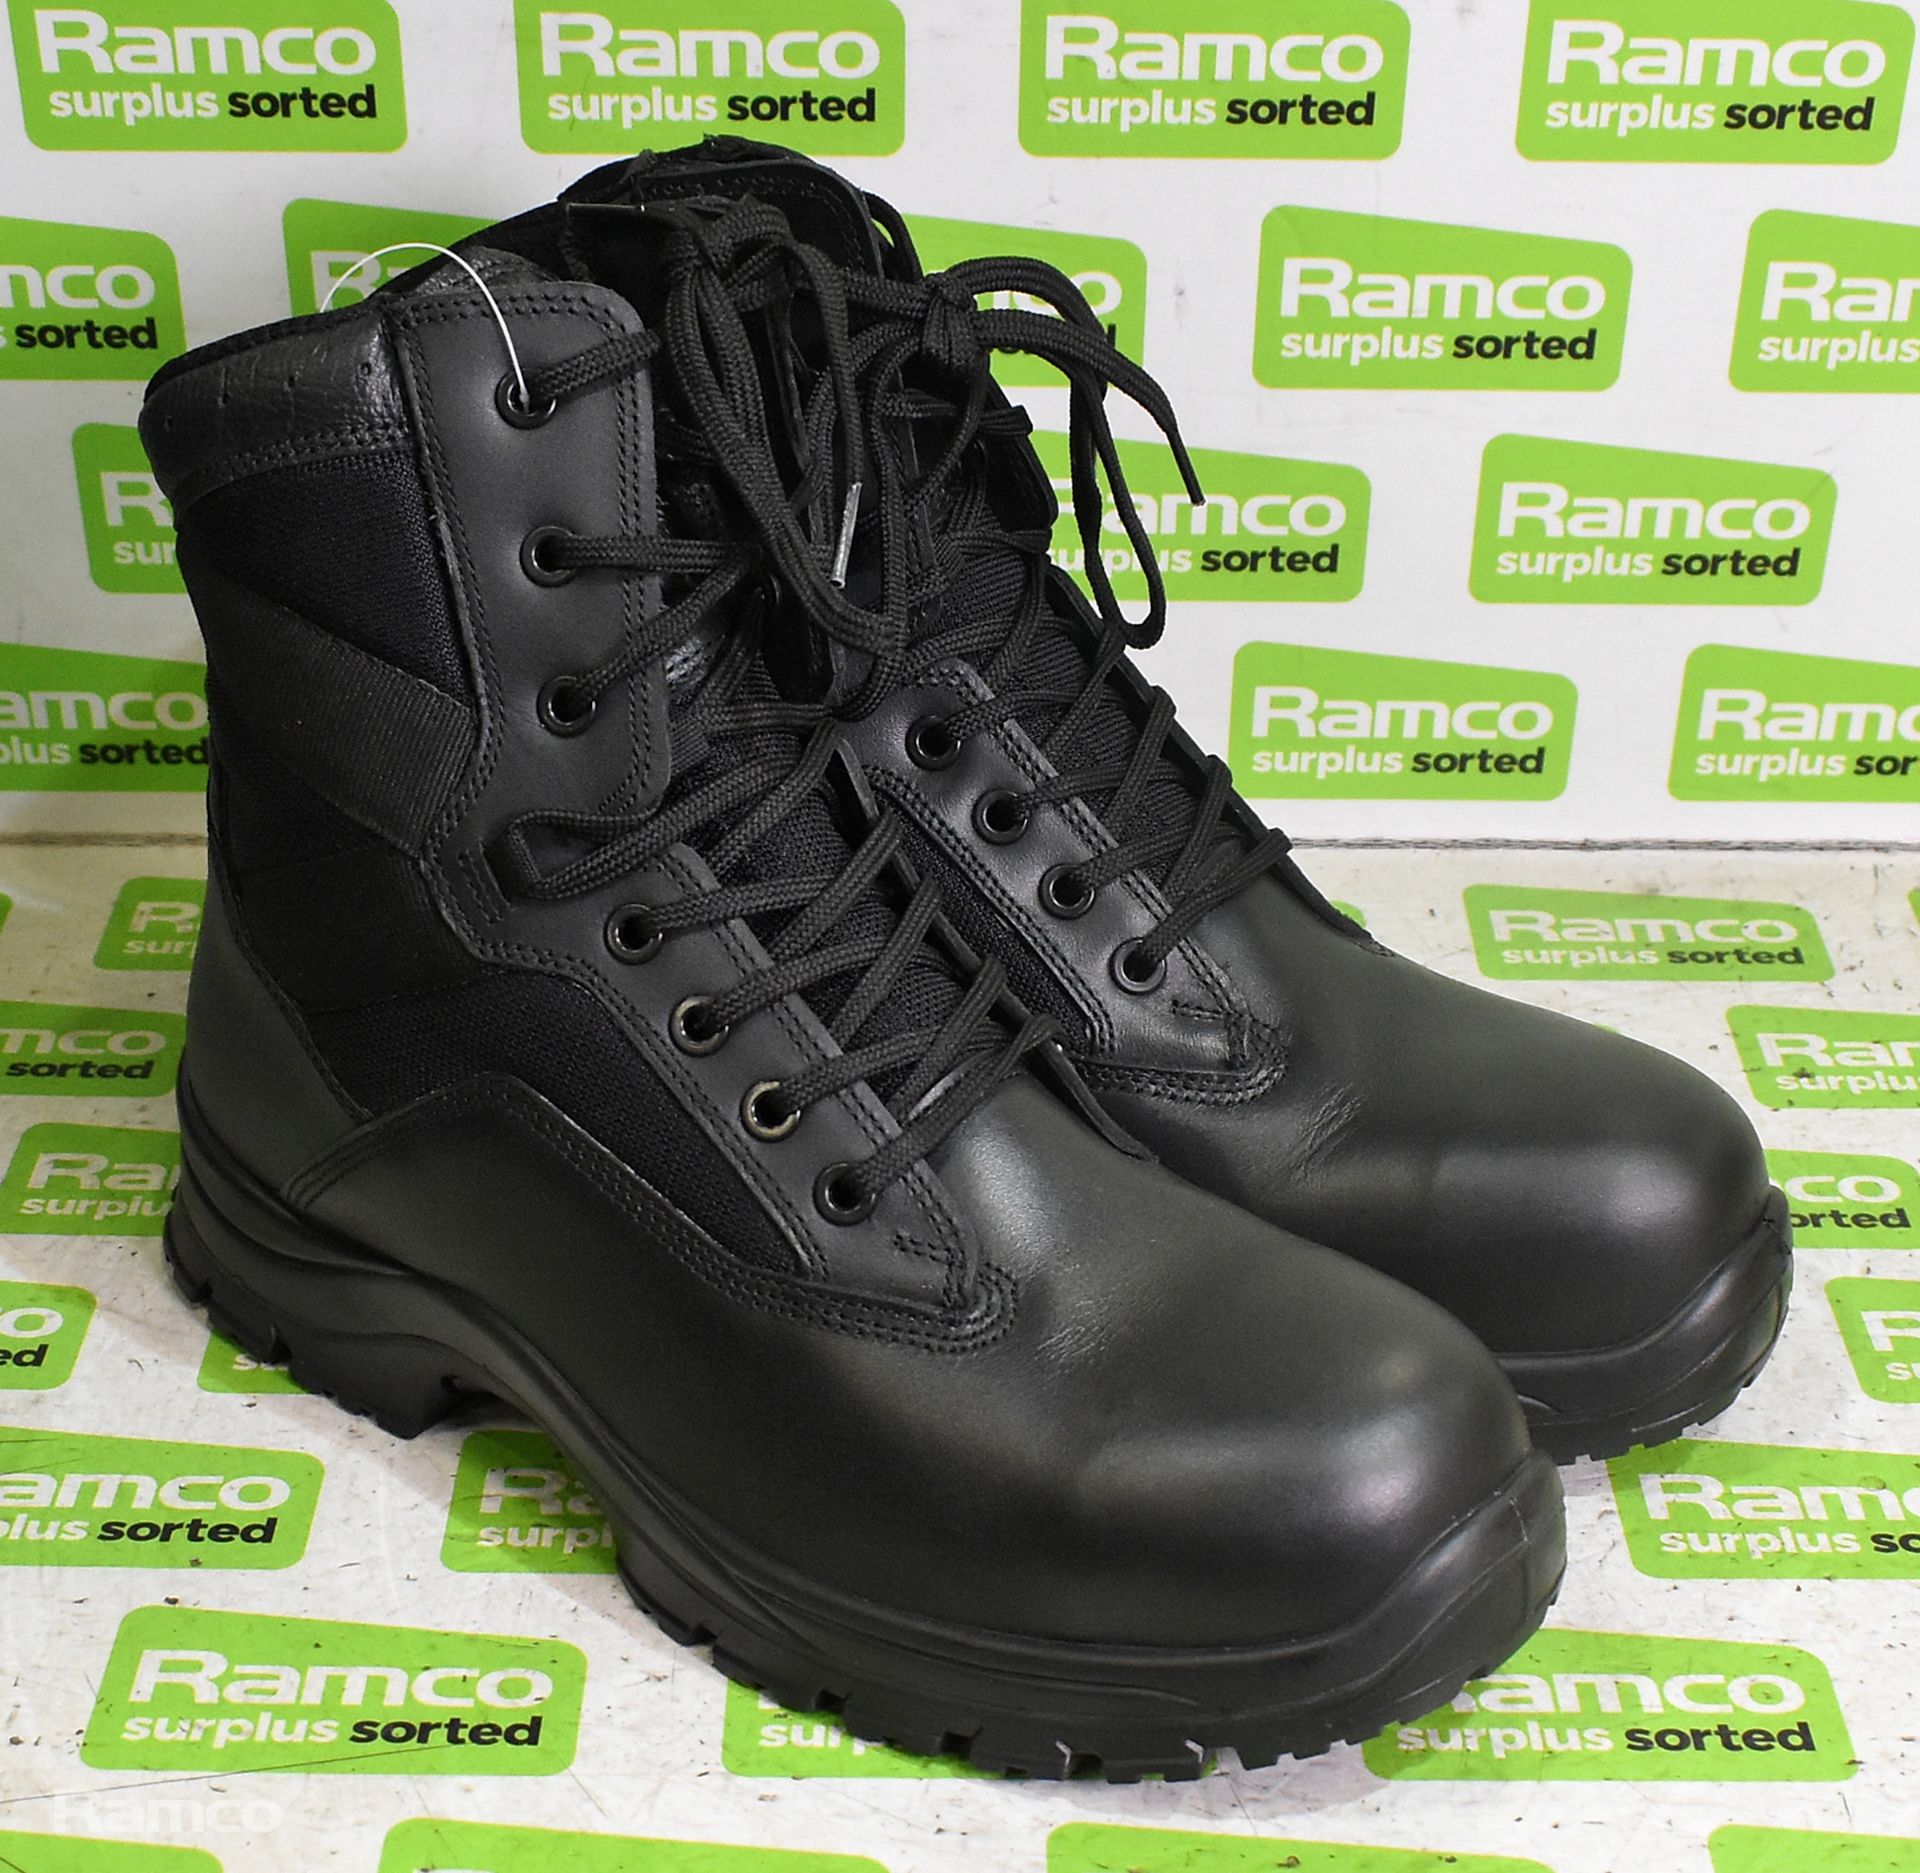 1x pair of Goliath warm weather boots - Size 11L - Image 2 of 5